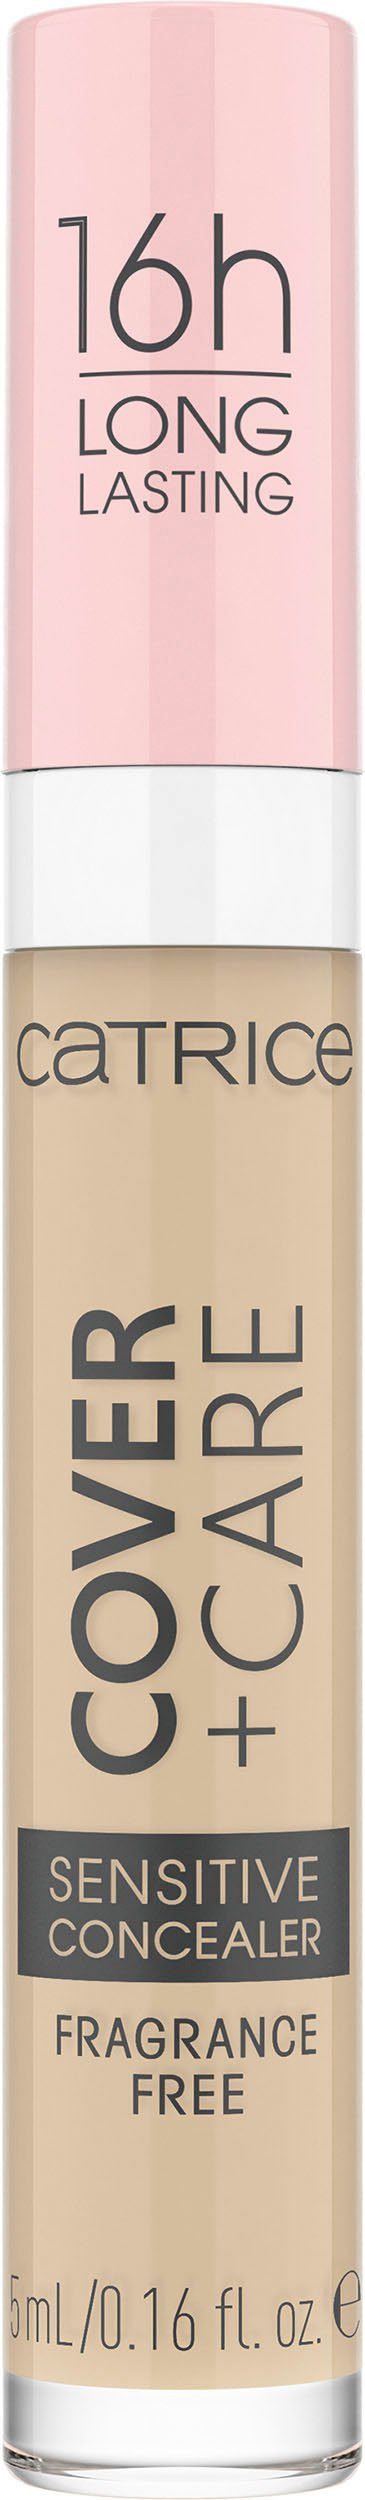 Concealer Care Catrice nude Concealer, Cover 002N Sensitive Catrice 3-tlg. +